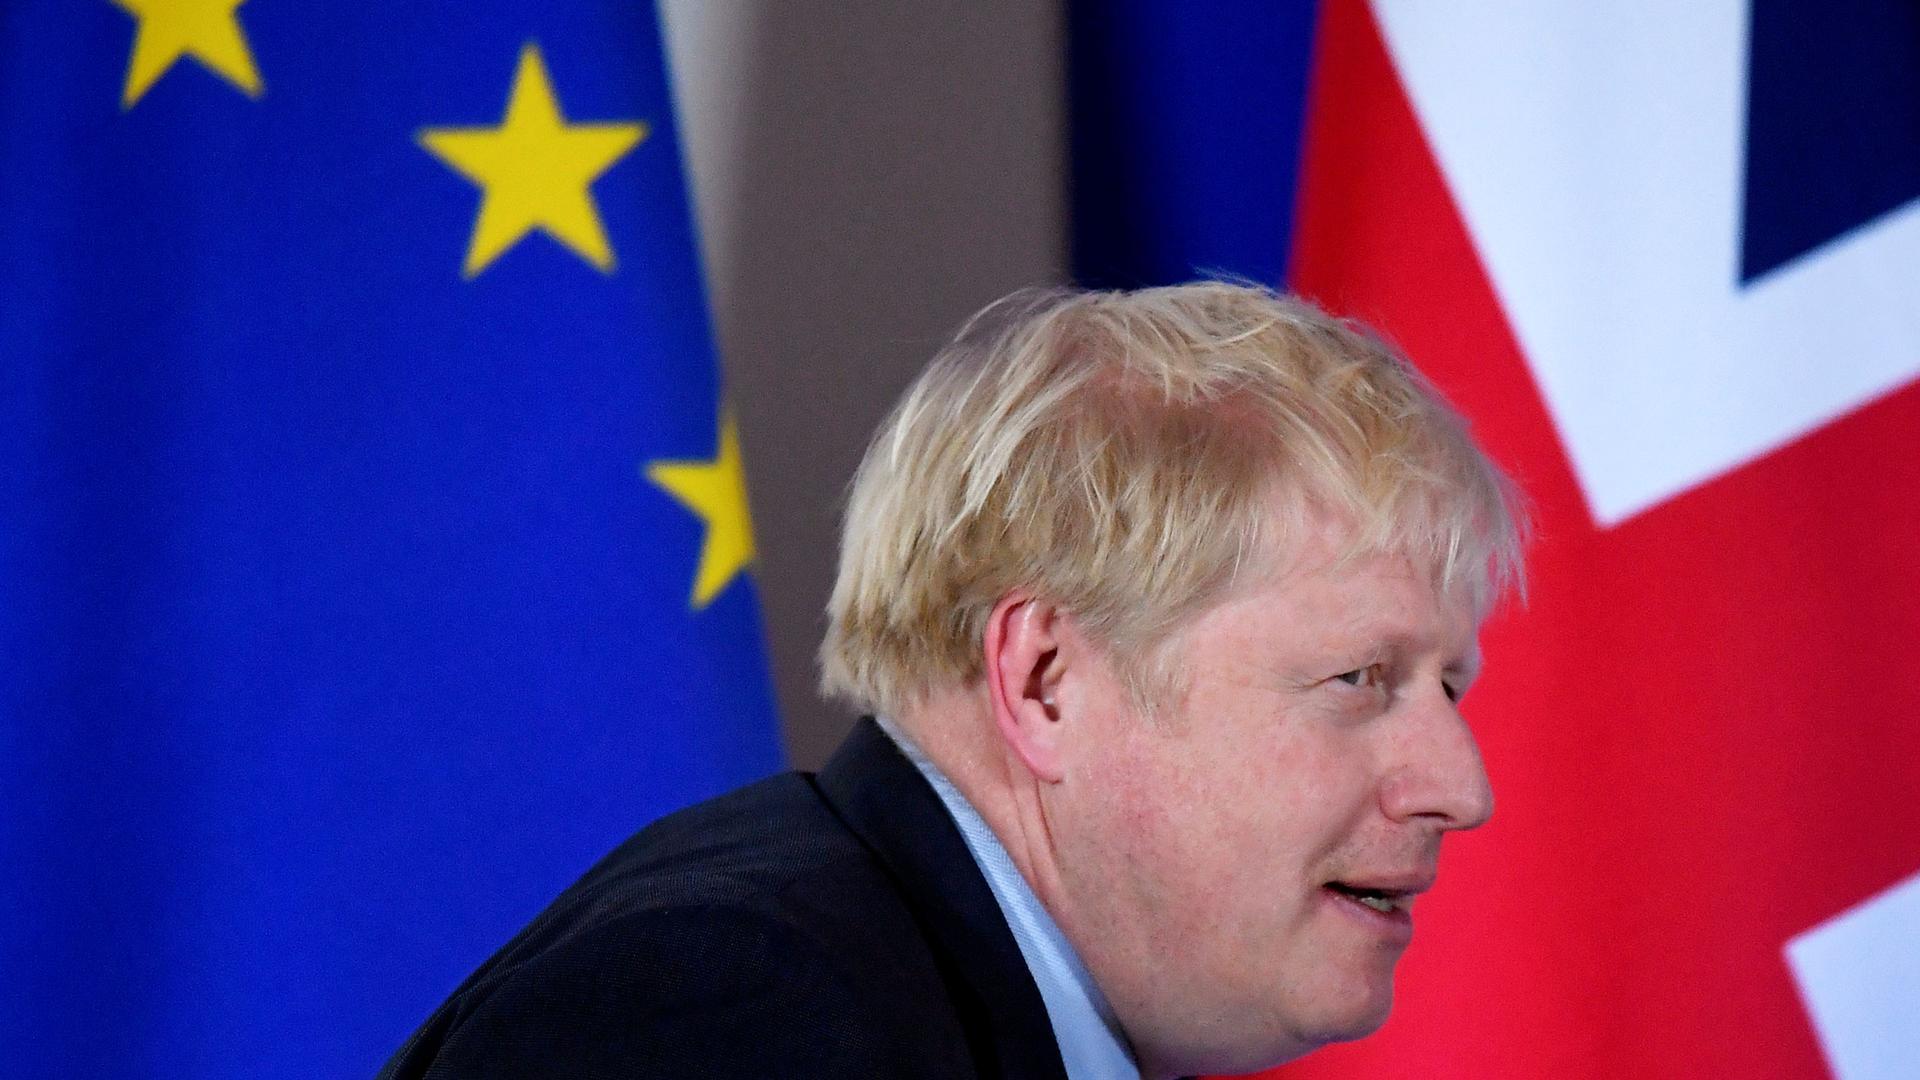 Britain's Prime Minister Boris Johnson is shown walking past the EU and UK flags.